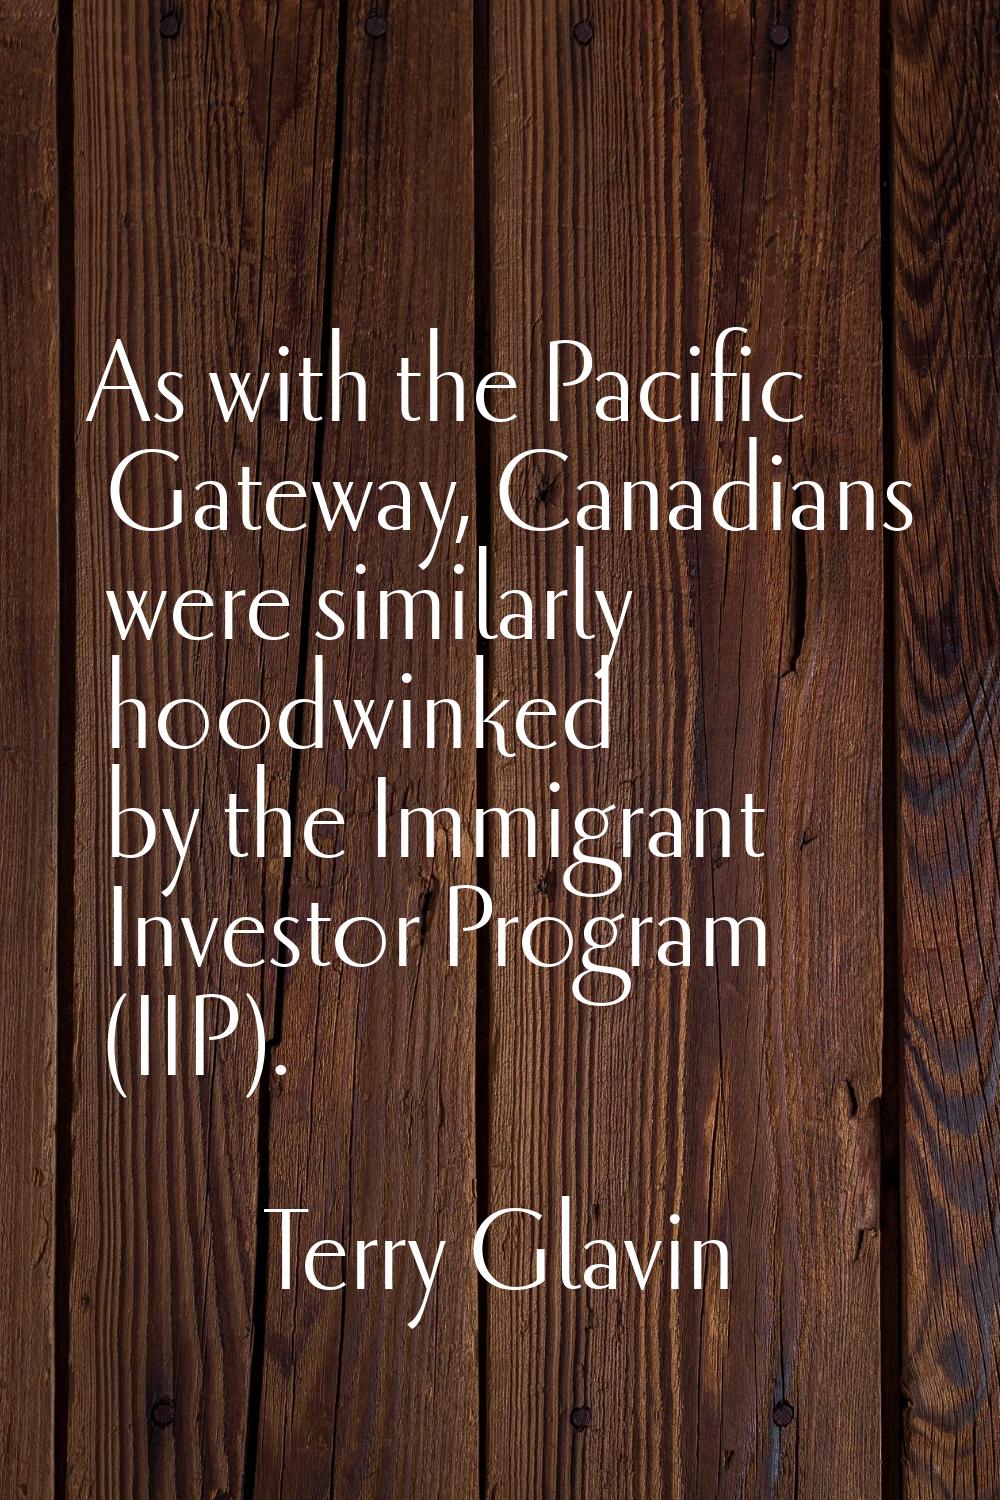 As with the Pacific Gateway, Canadians were similarly hoodwinked by the Immigrant Investor Program 